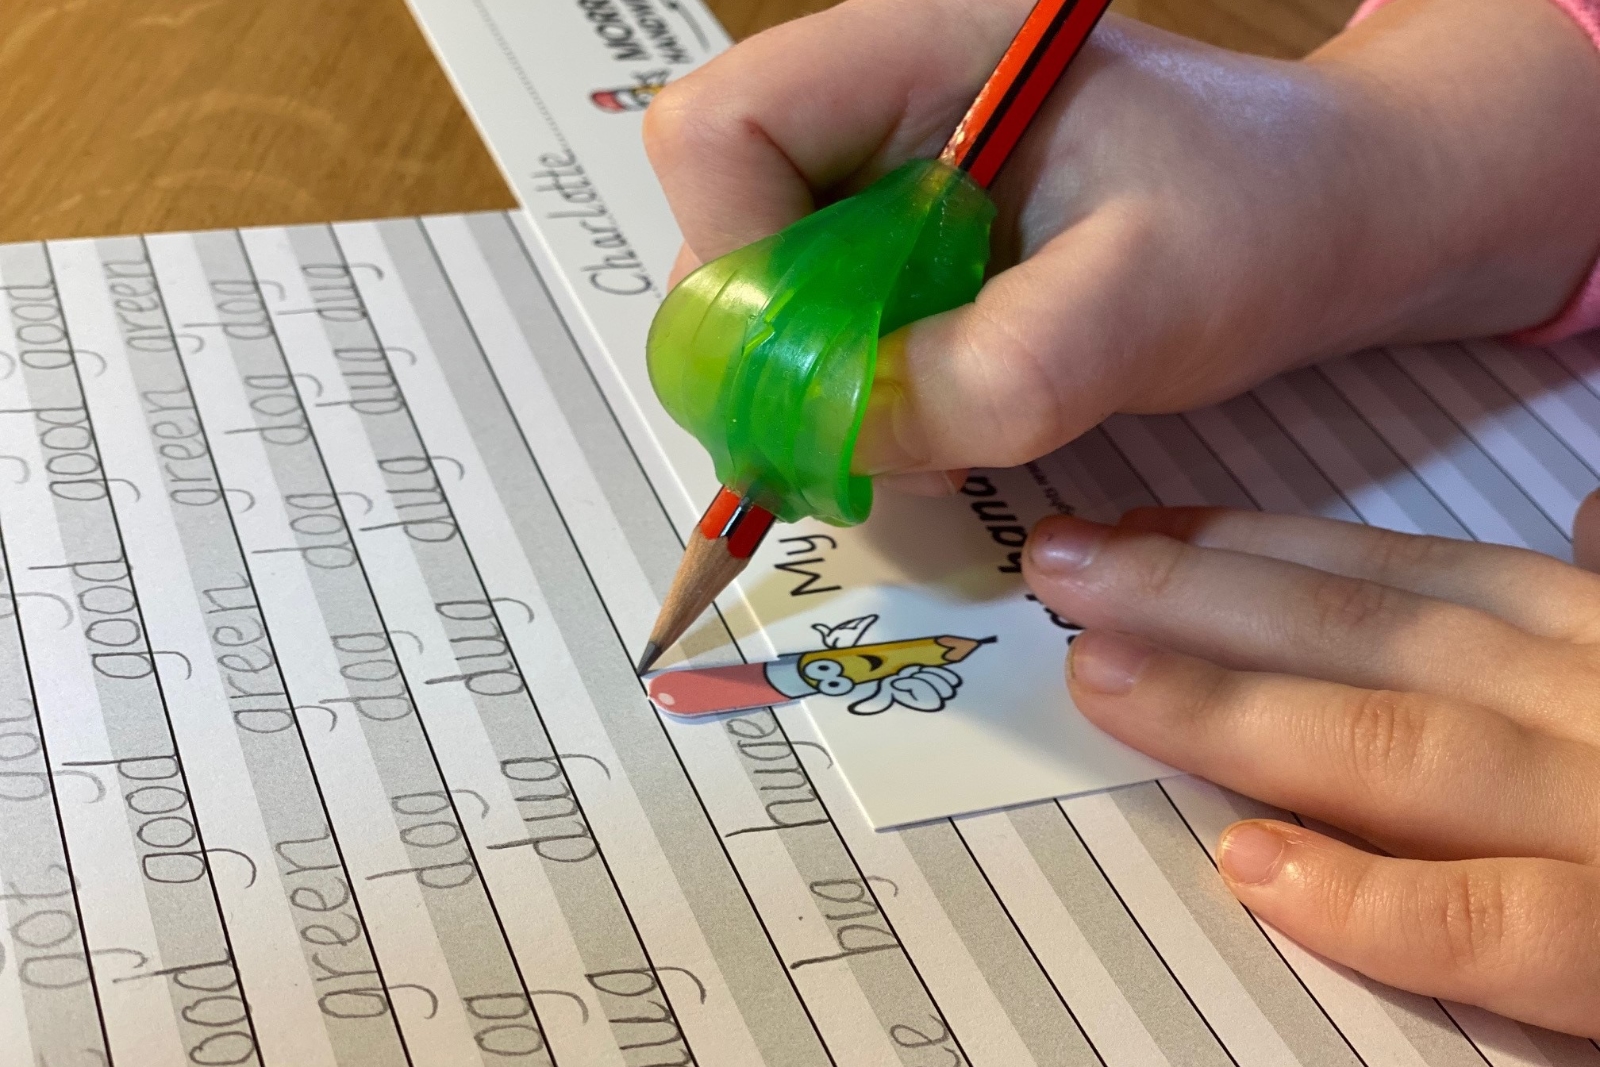 Grotto Grip used with a pencil and hand writing book